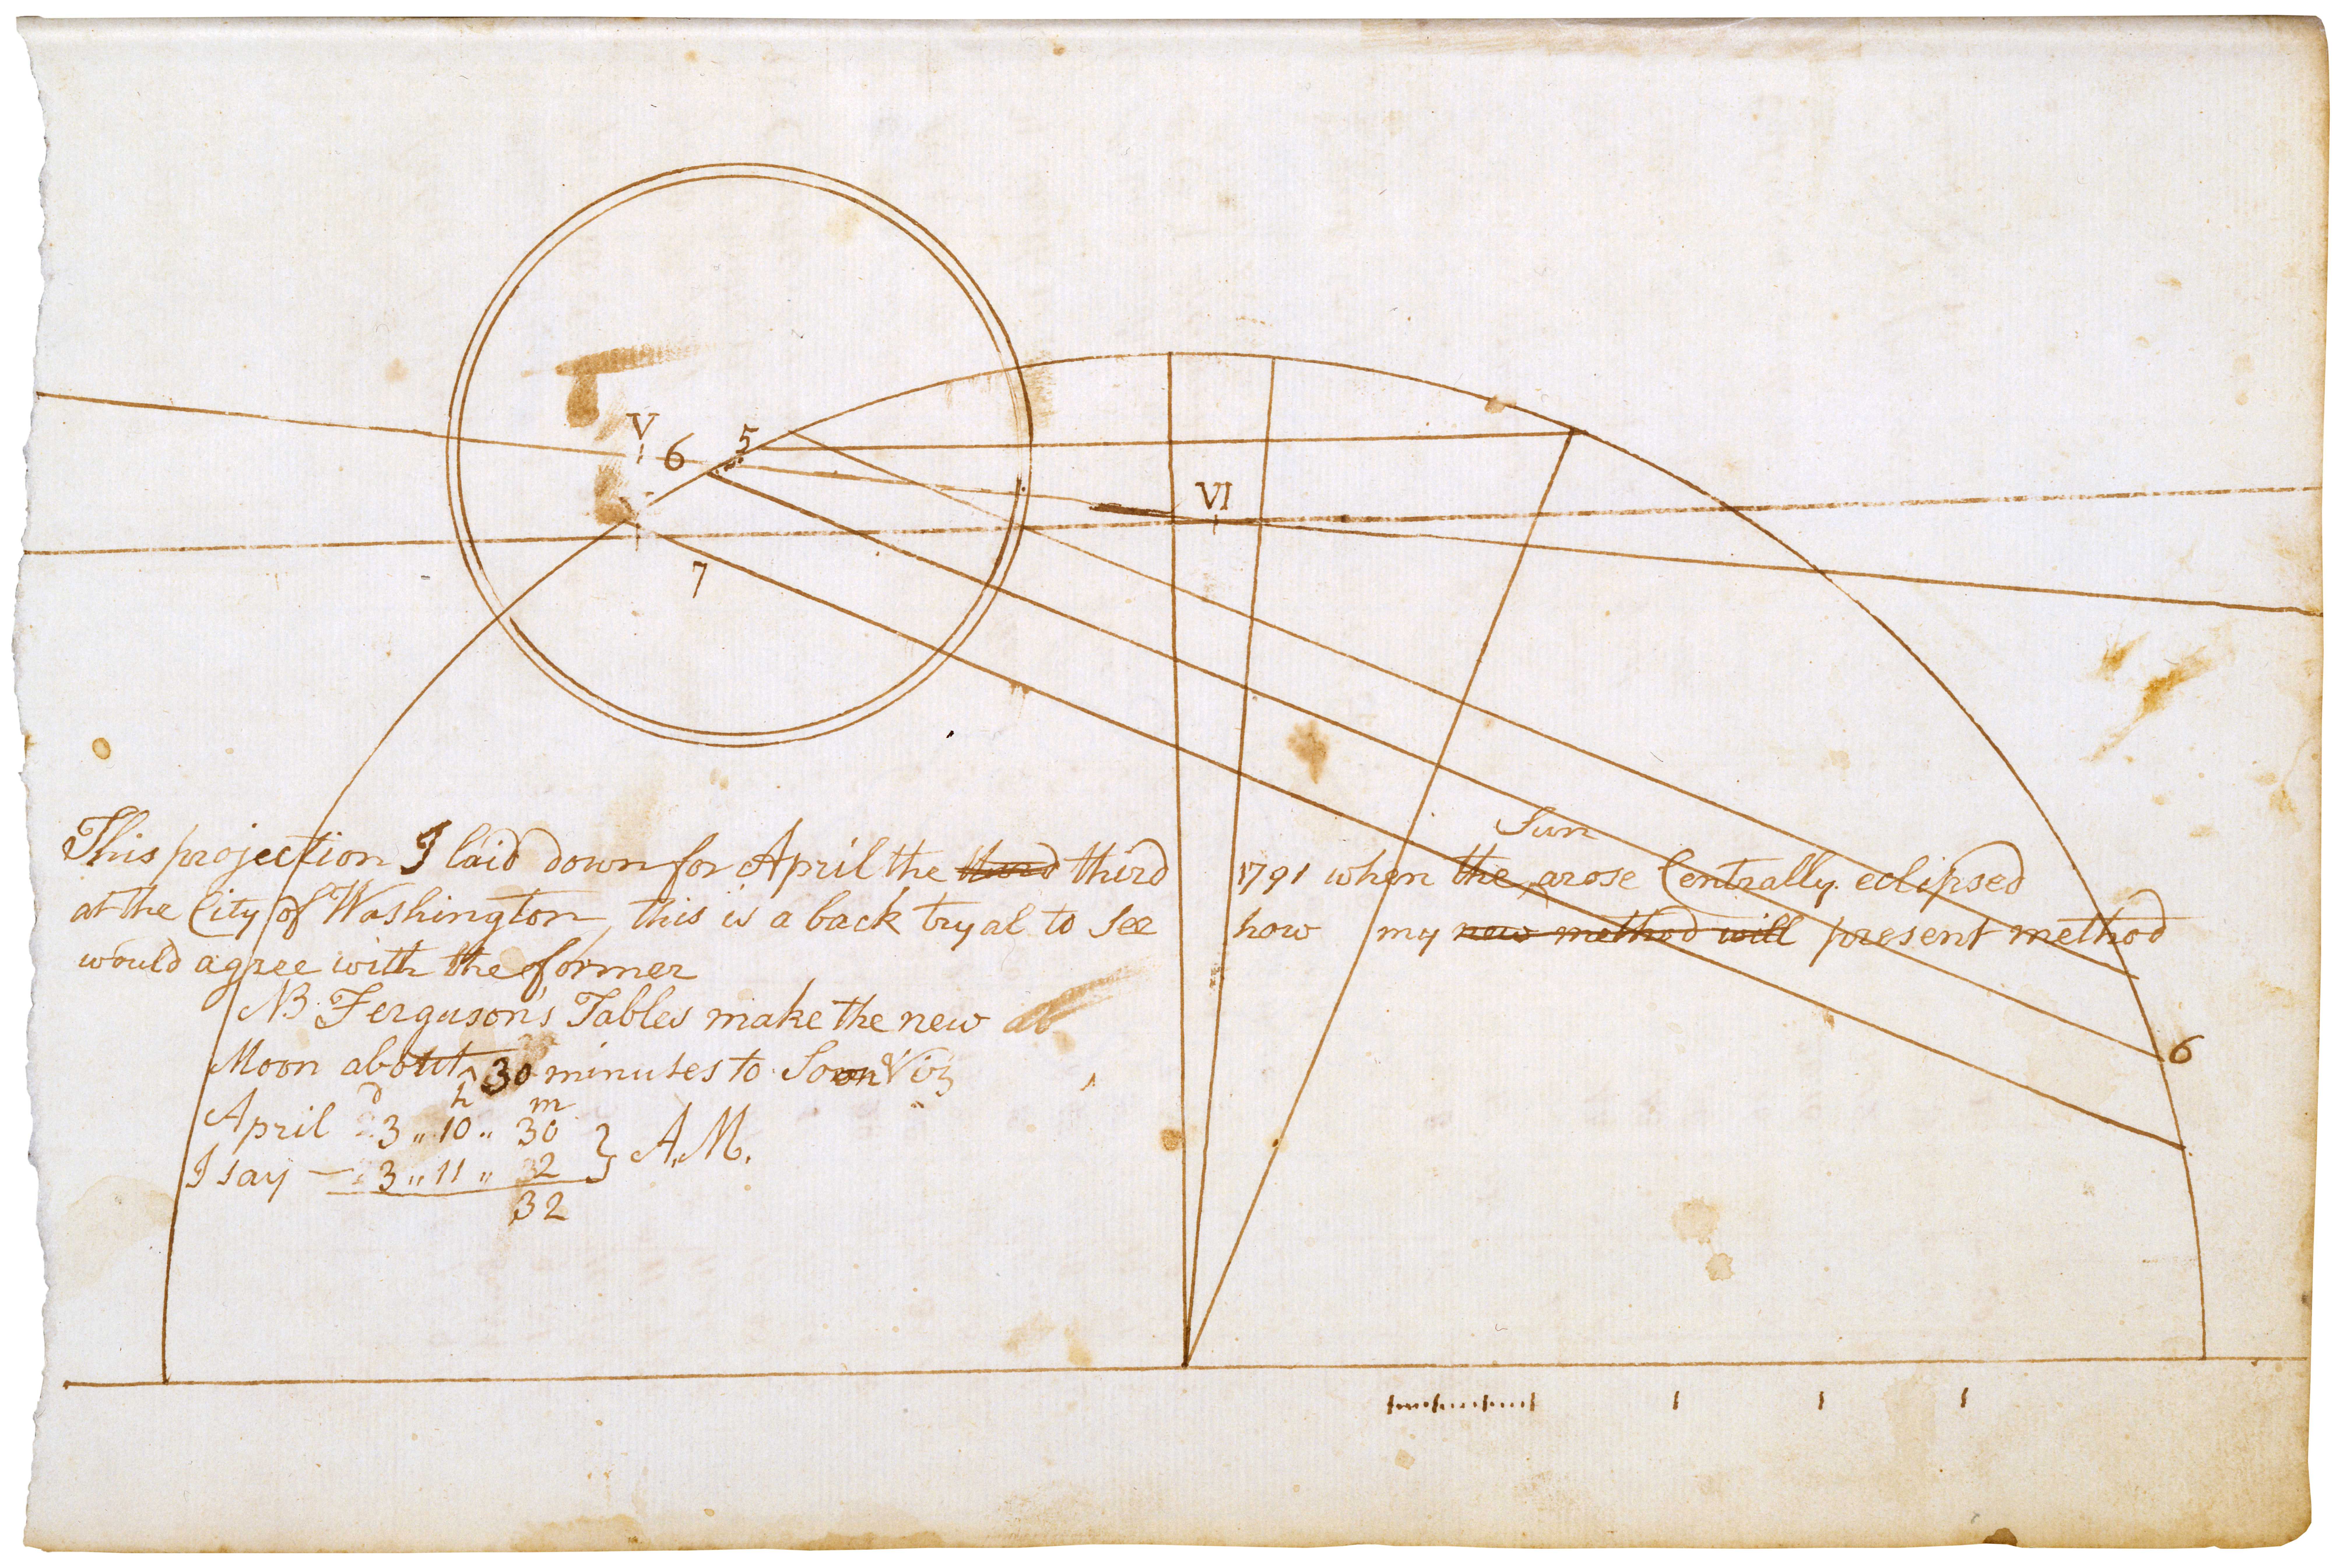 A drawing of a diagram of eclipses from Banneker's personal journals.